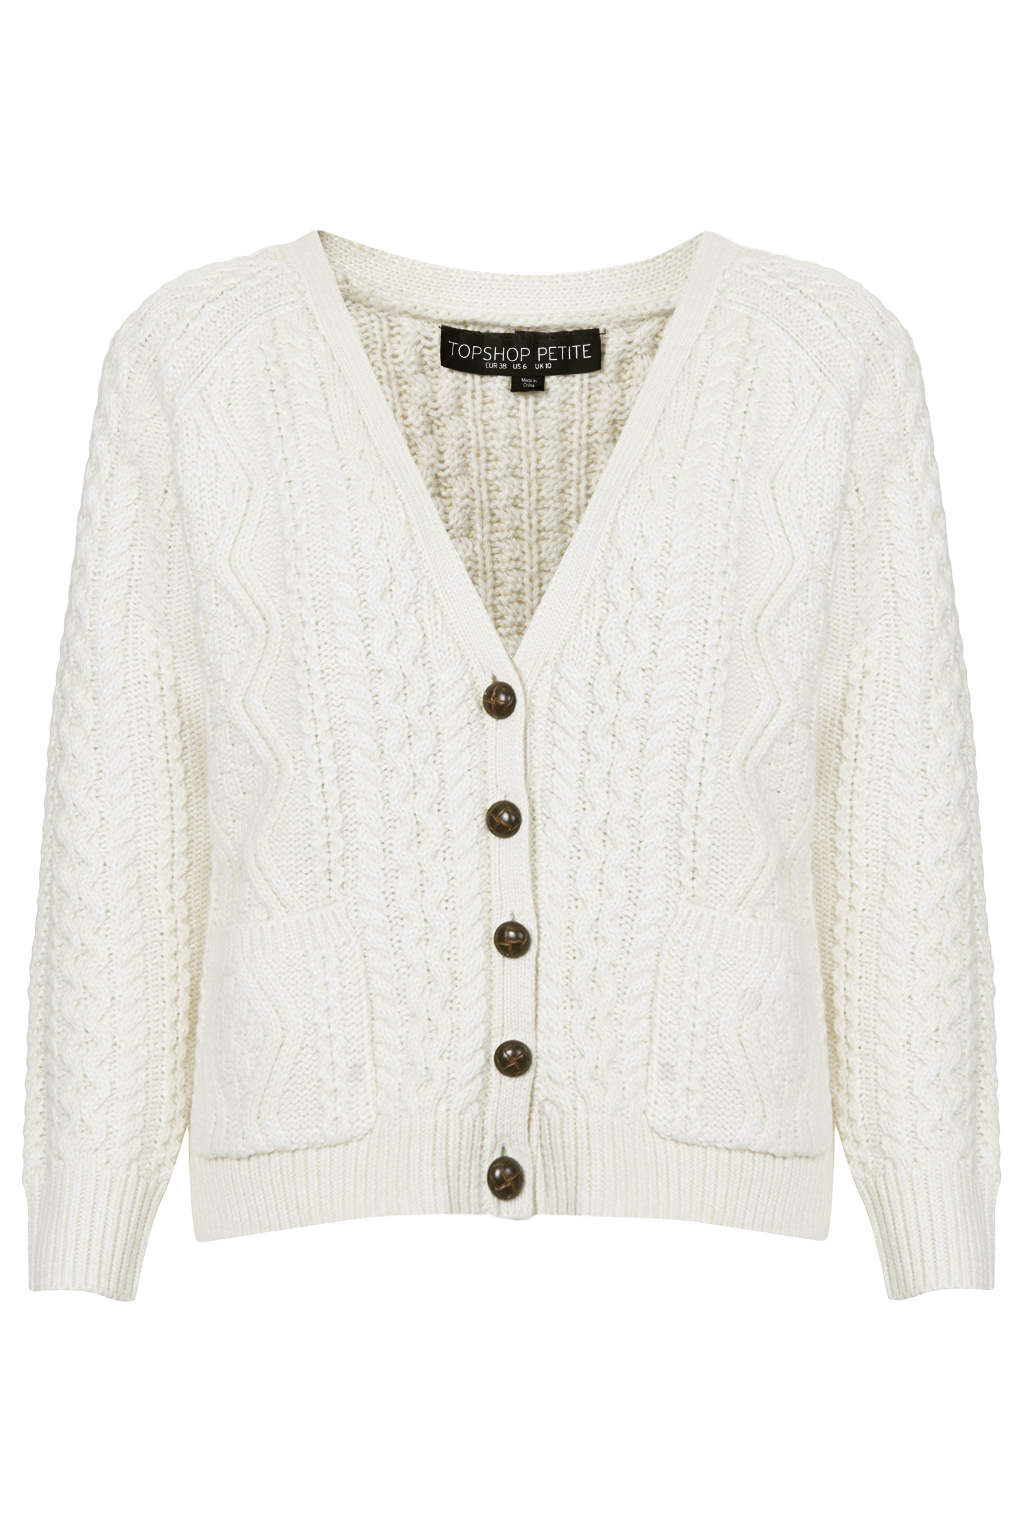 Topshop Petite Cable Knit Cardigan in White | Lyst